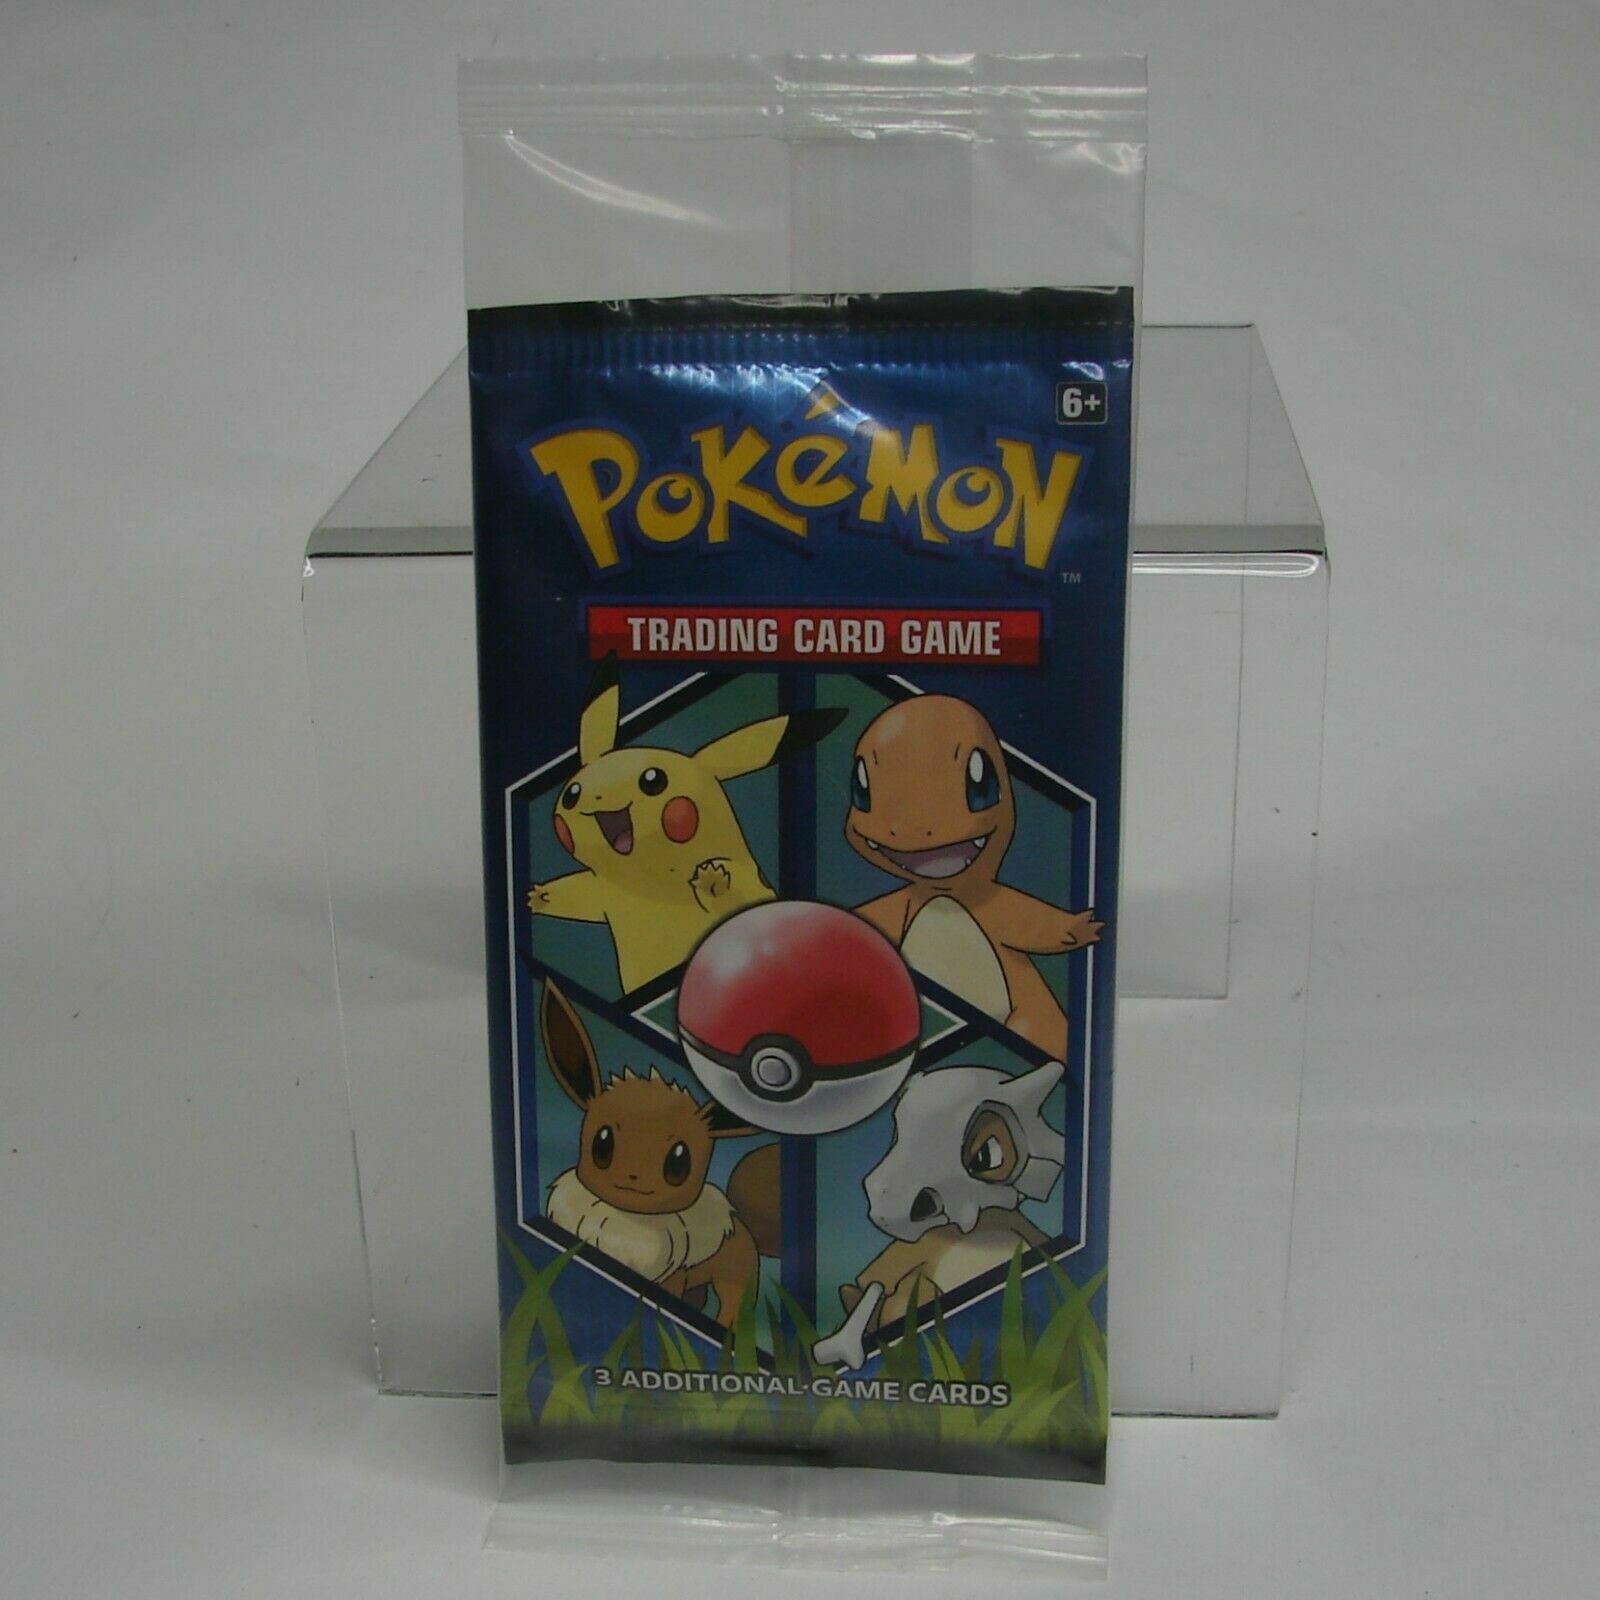 Pokemon Trading Card Game 3 Additional Cards Sealed PBMI17